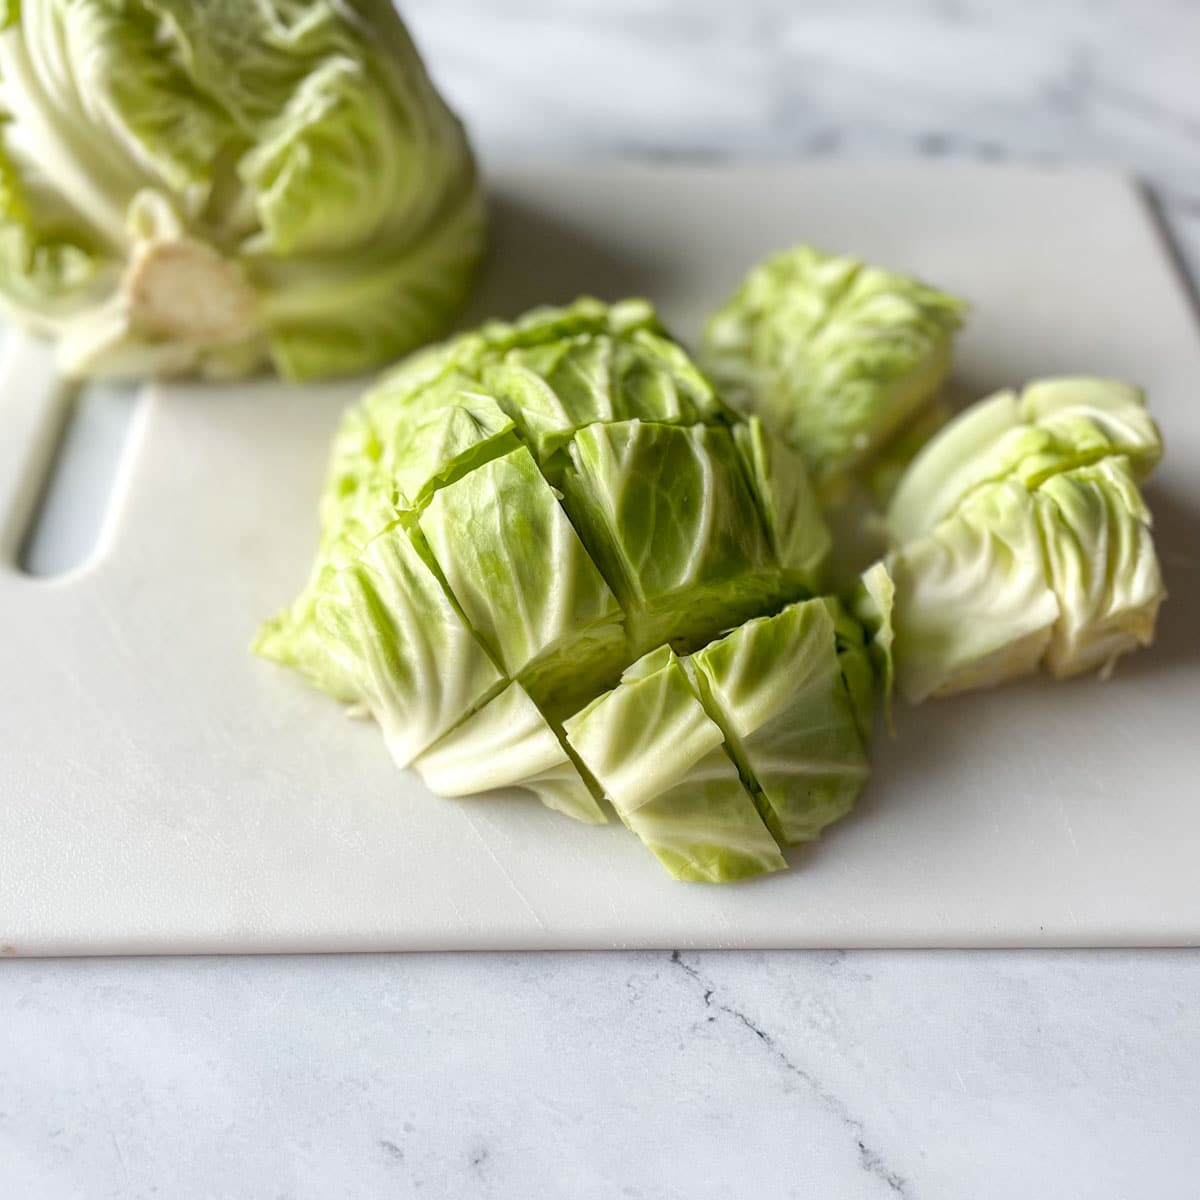 Cabbage is cut into bite-sized pieces.